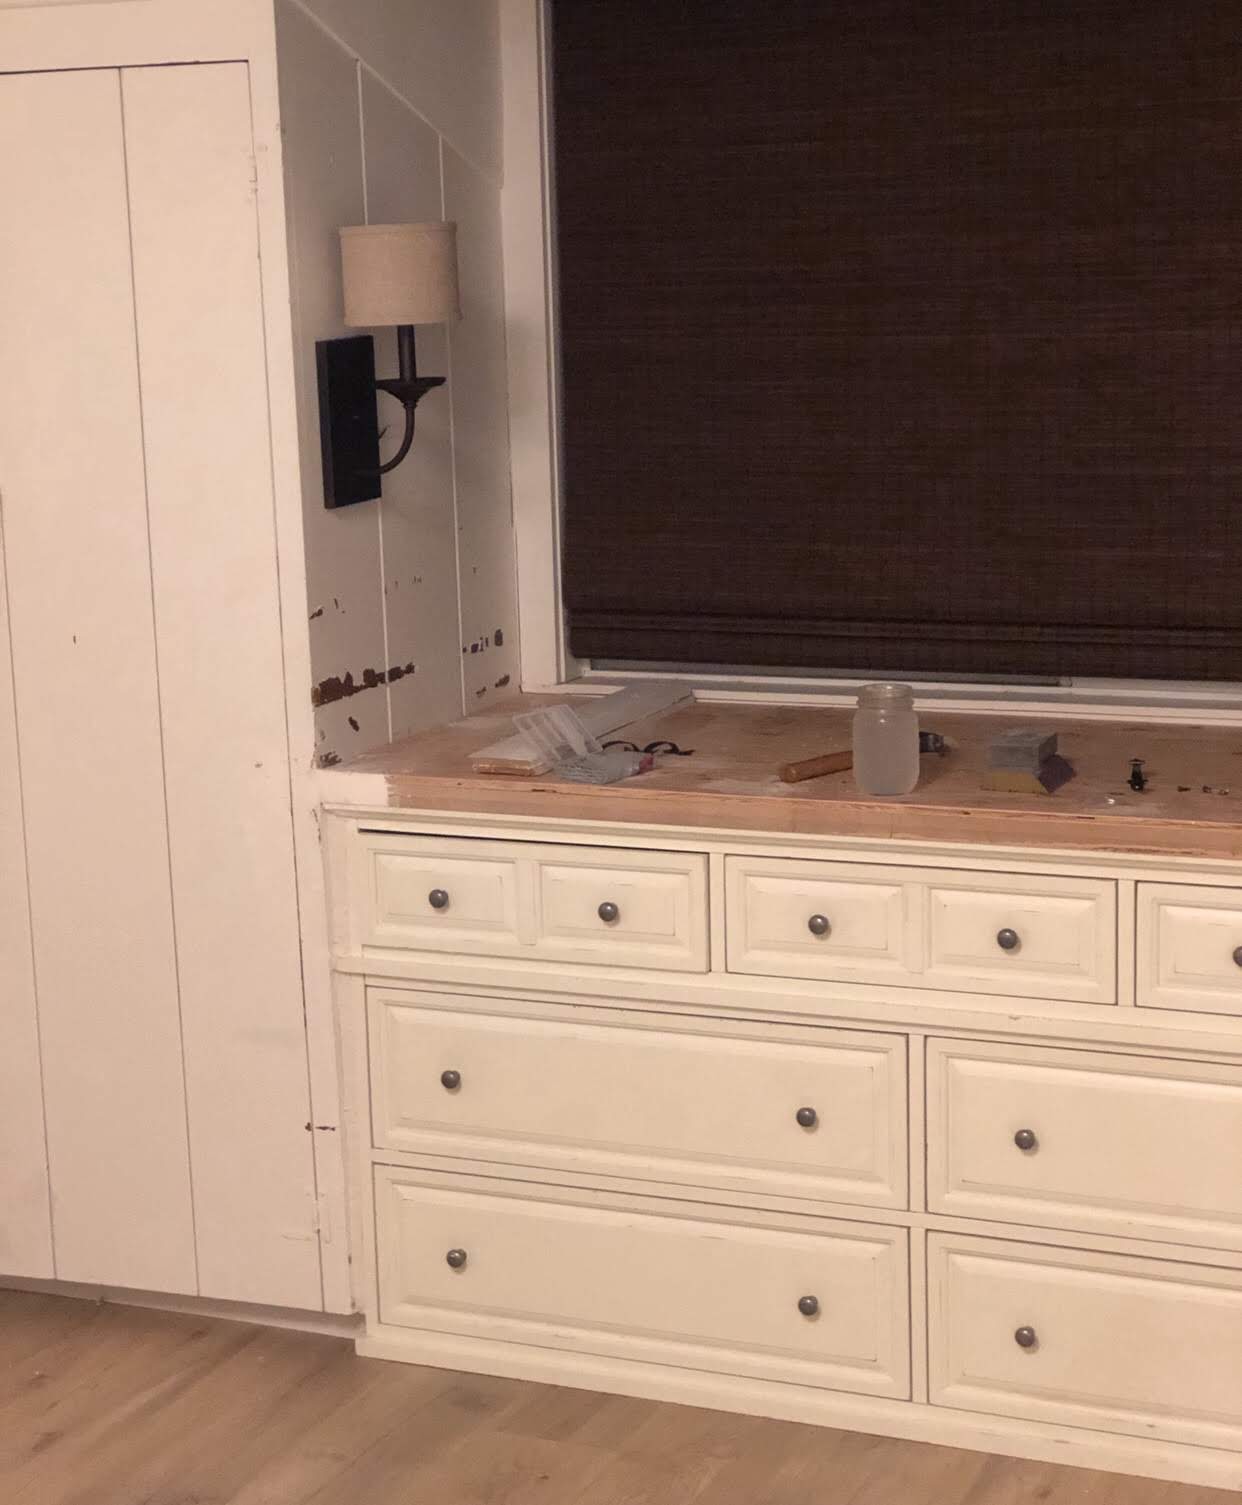 How I repurposed an old dresser and turned it into a beautiful built-in for my daughter's bedroom and completely transformed the space. Built in closets, interior dormer window, swiss coffee white paint, laminate wood floors, 1950 beach cottage